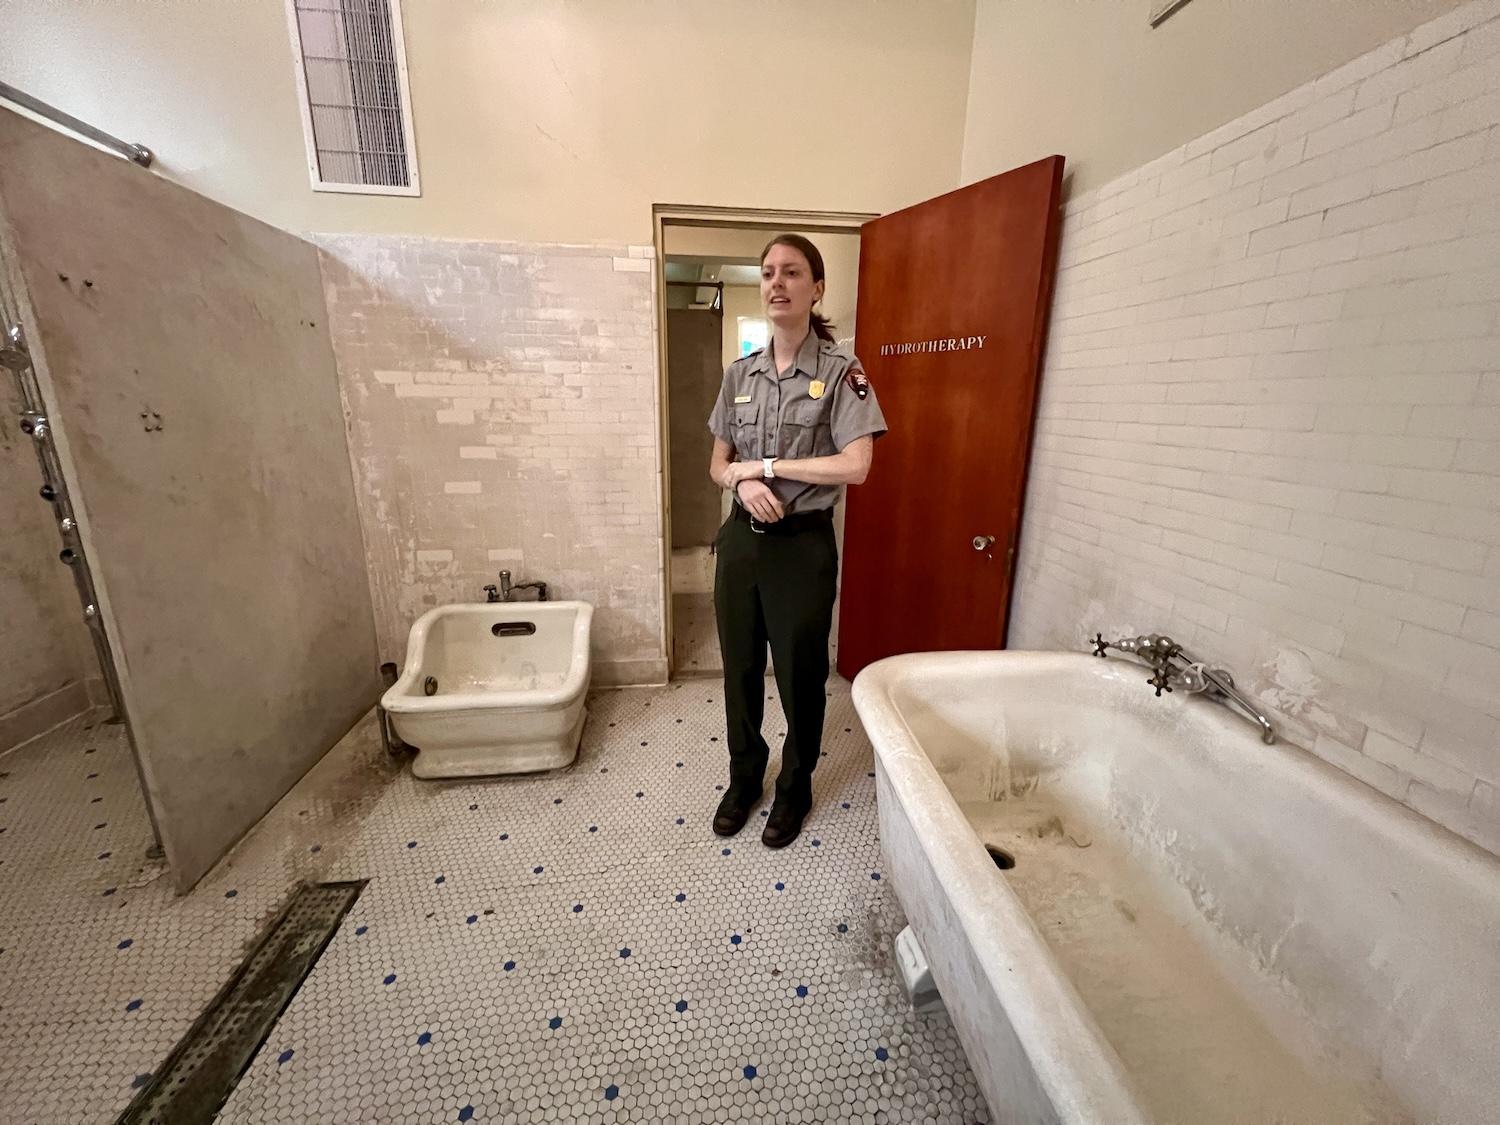 Hot Springs National Park ranger Kendra Barat shows off historic sitz and bath tubs at the Park Service's visitor center/museum in the Fordyce Bathhouse.